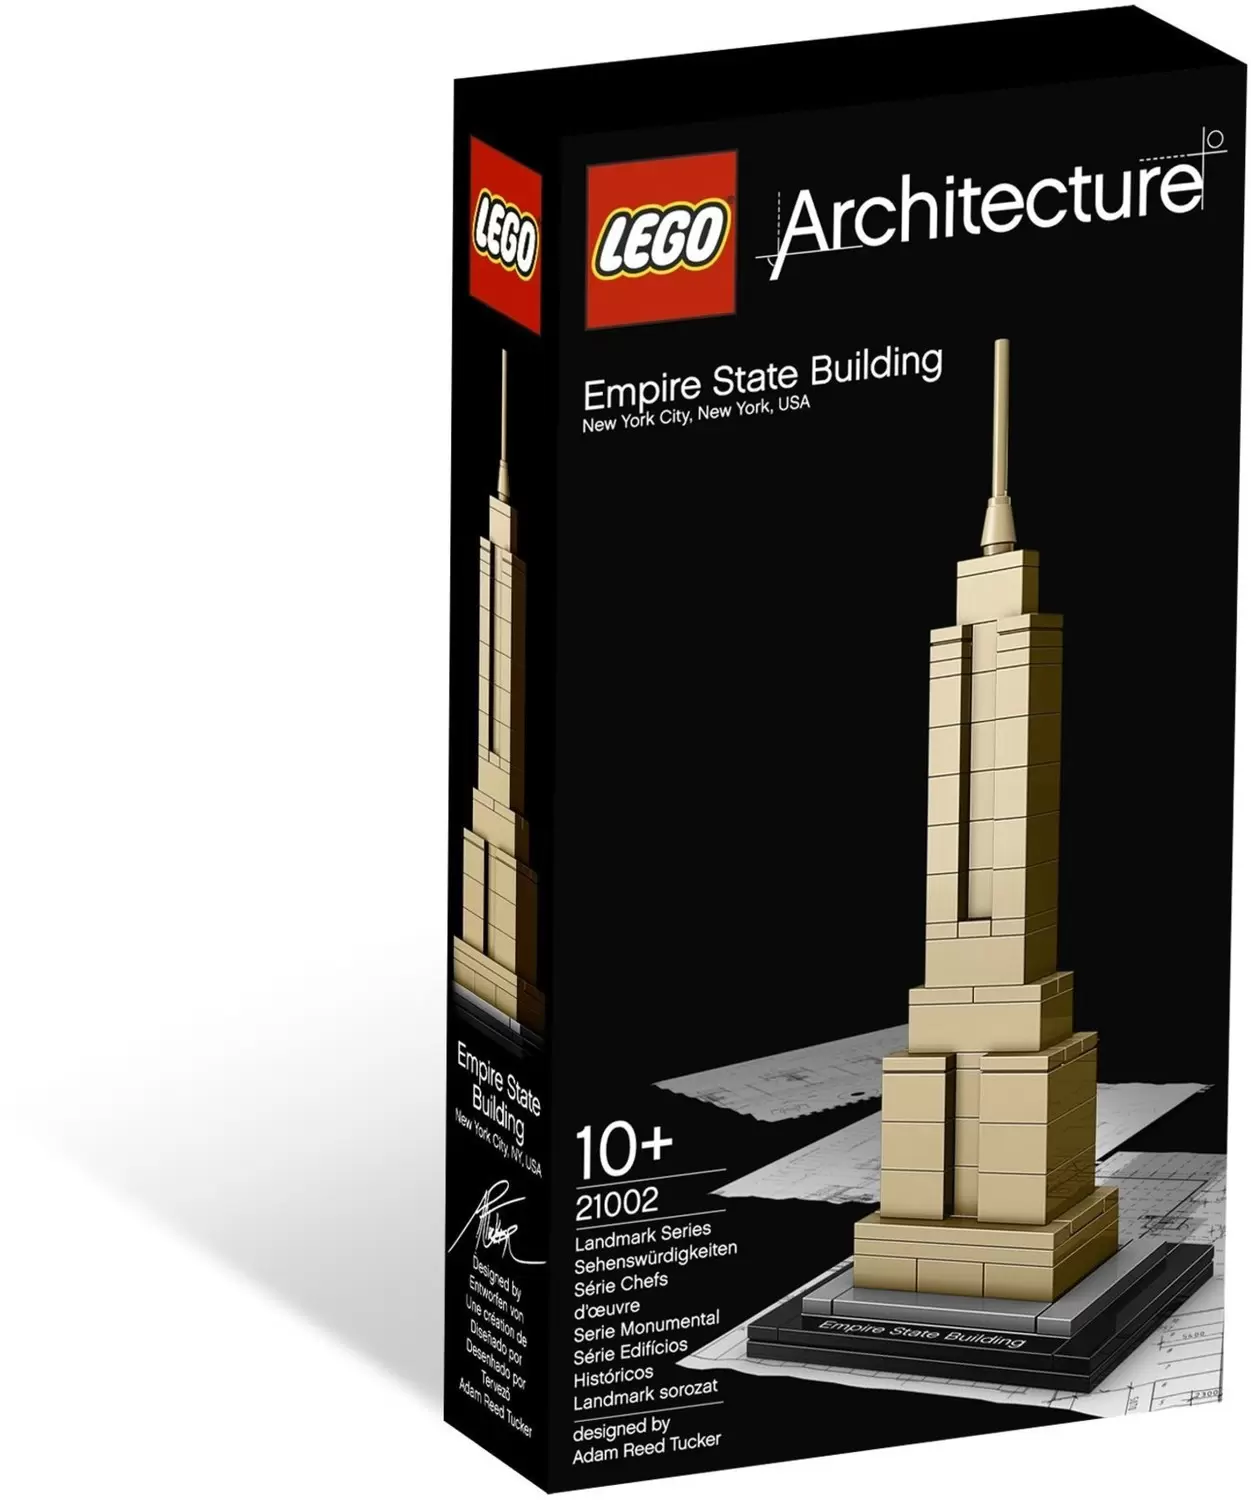 Penelope inden for solopgang Empire State Building - LEGO Architecture set 21002